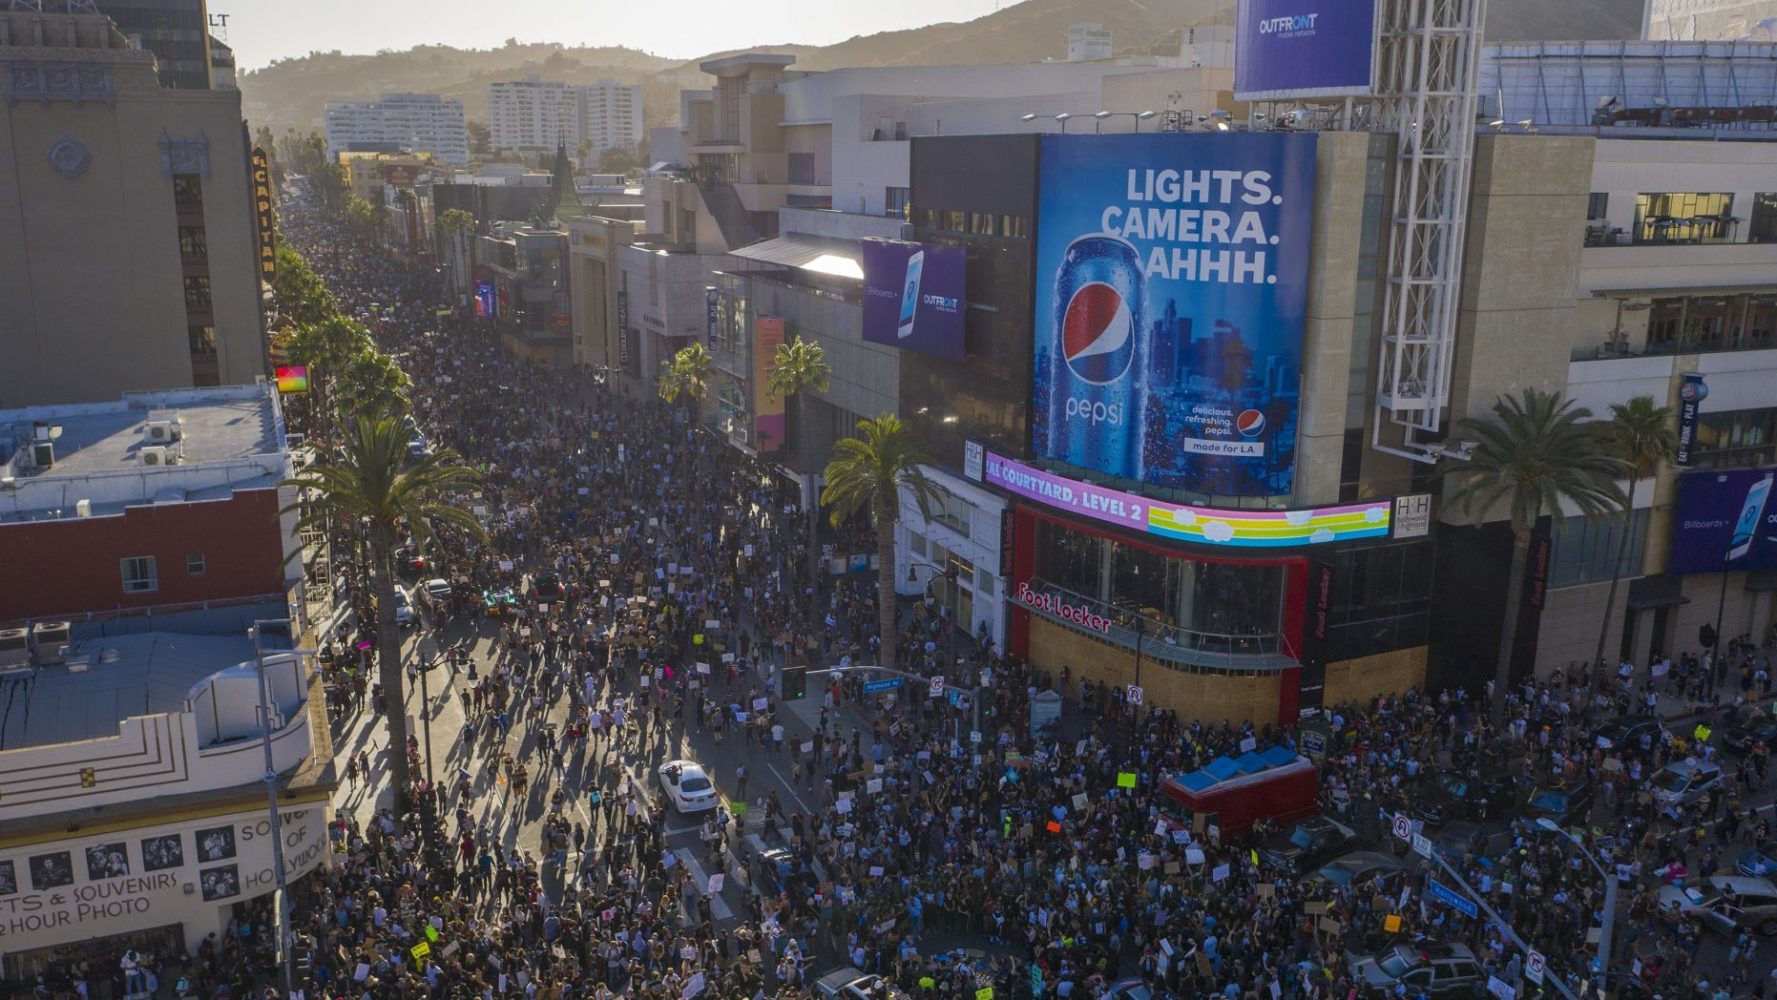 Black Lives Matter Protest in Hollywood - via Getty Images